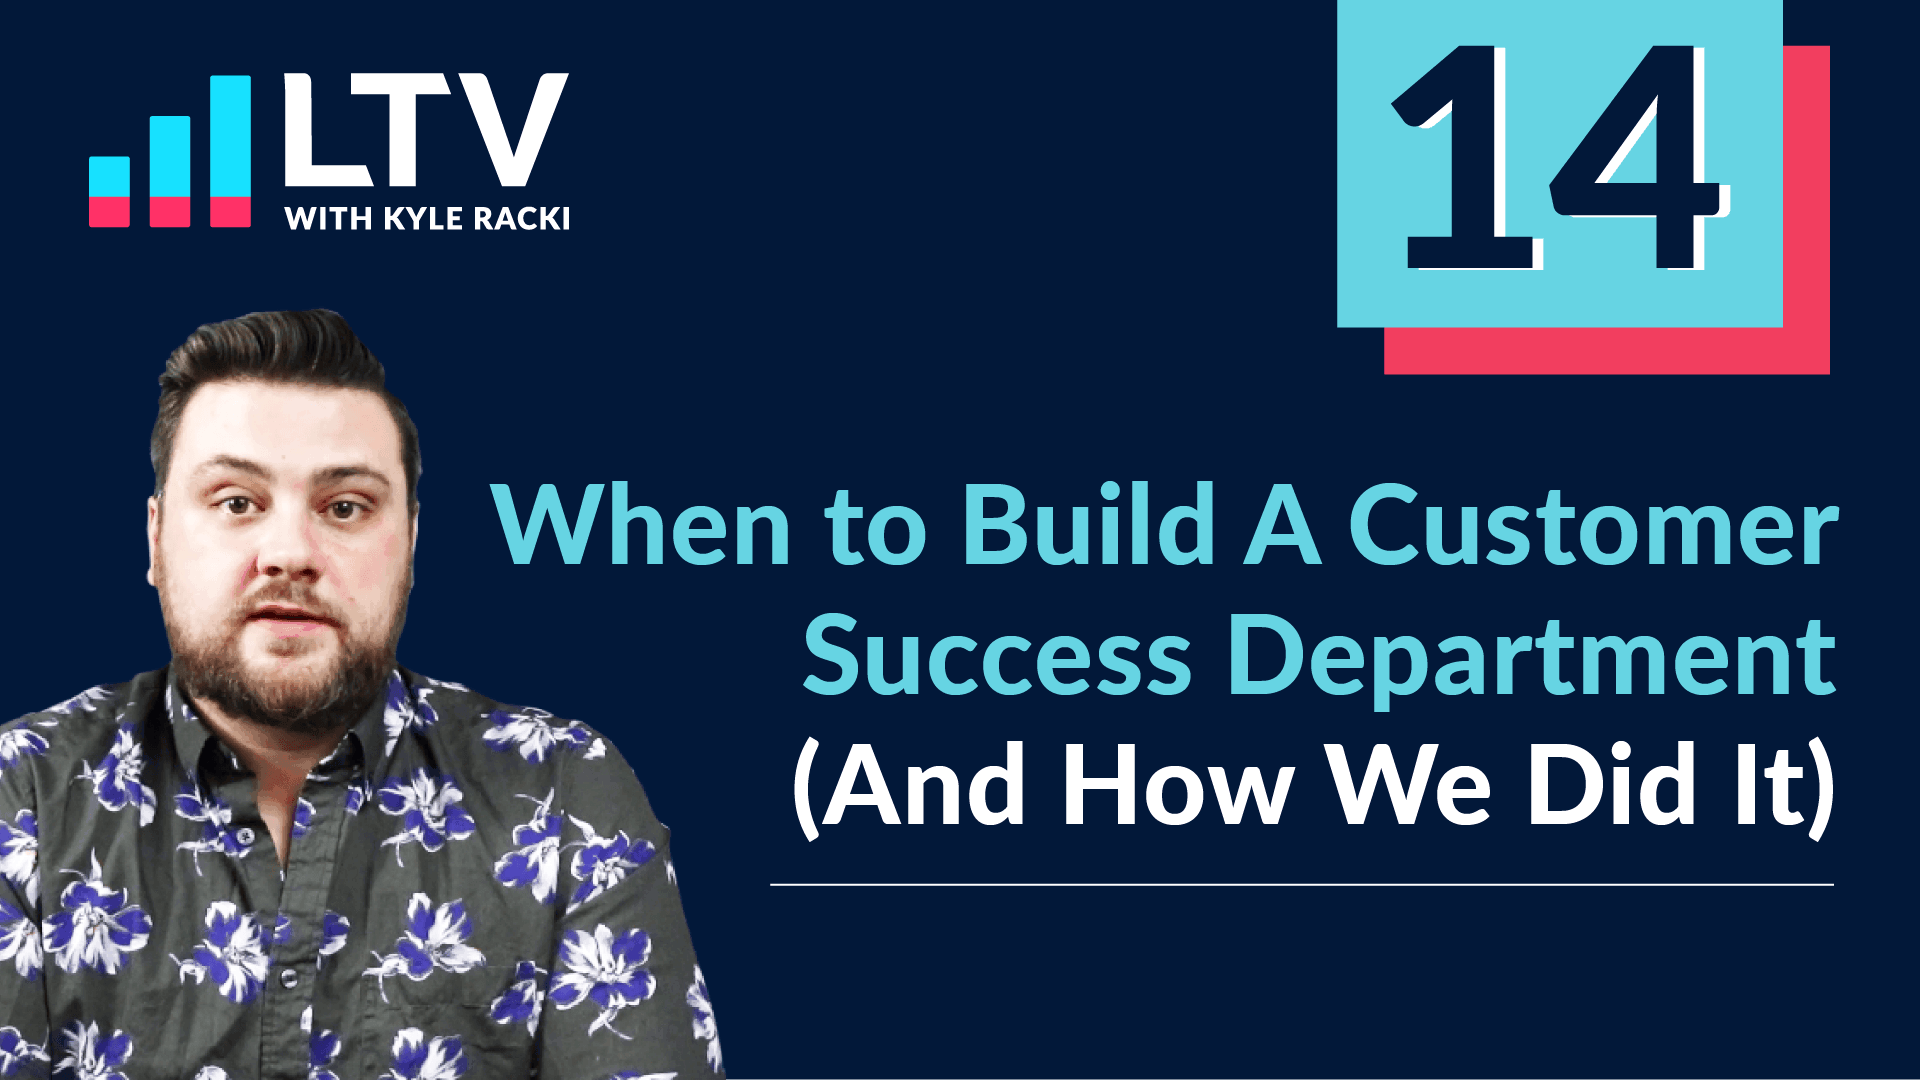 LTV Podcast: When to Build a Customer Success Department (And How We Did It)